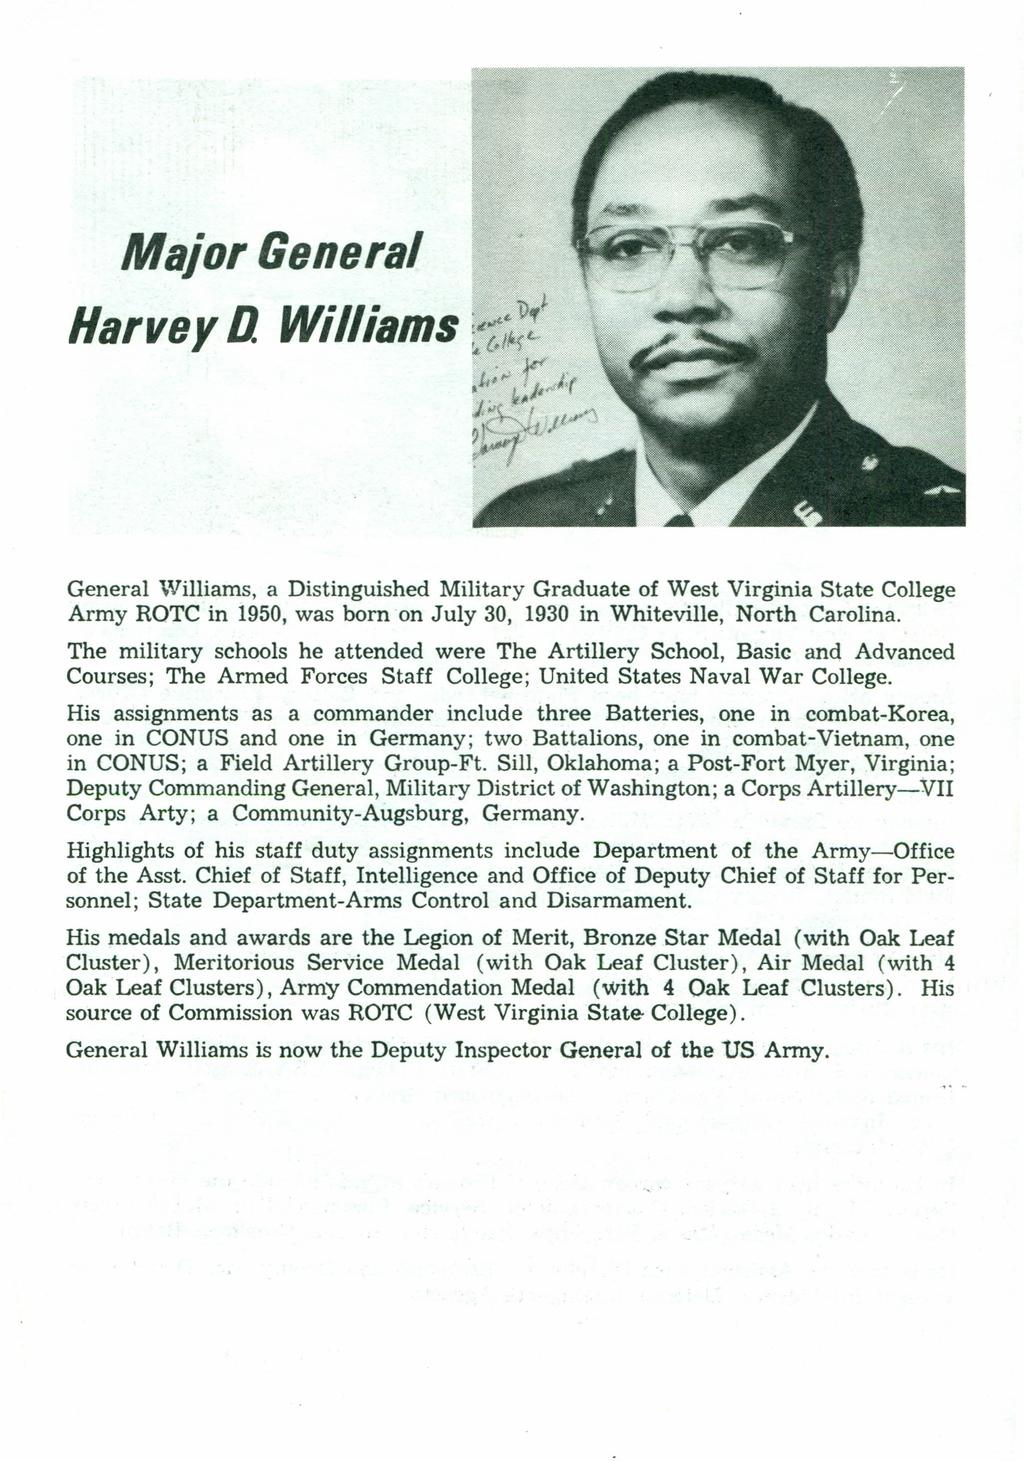 General Williams, a Distinguished Military Graduate of West Virginia State College Army ROTC in 1950,was born on July 30, 1930 in Whiteville, North Carolina.